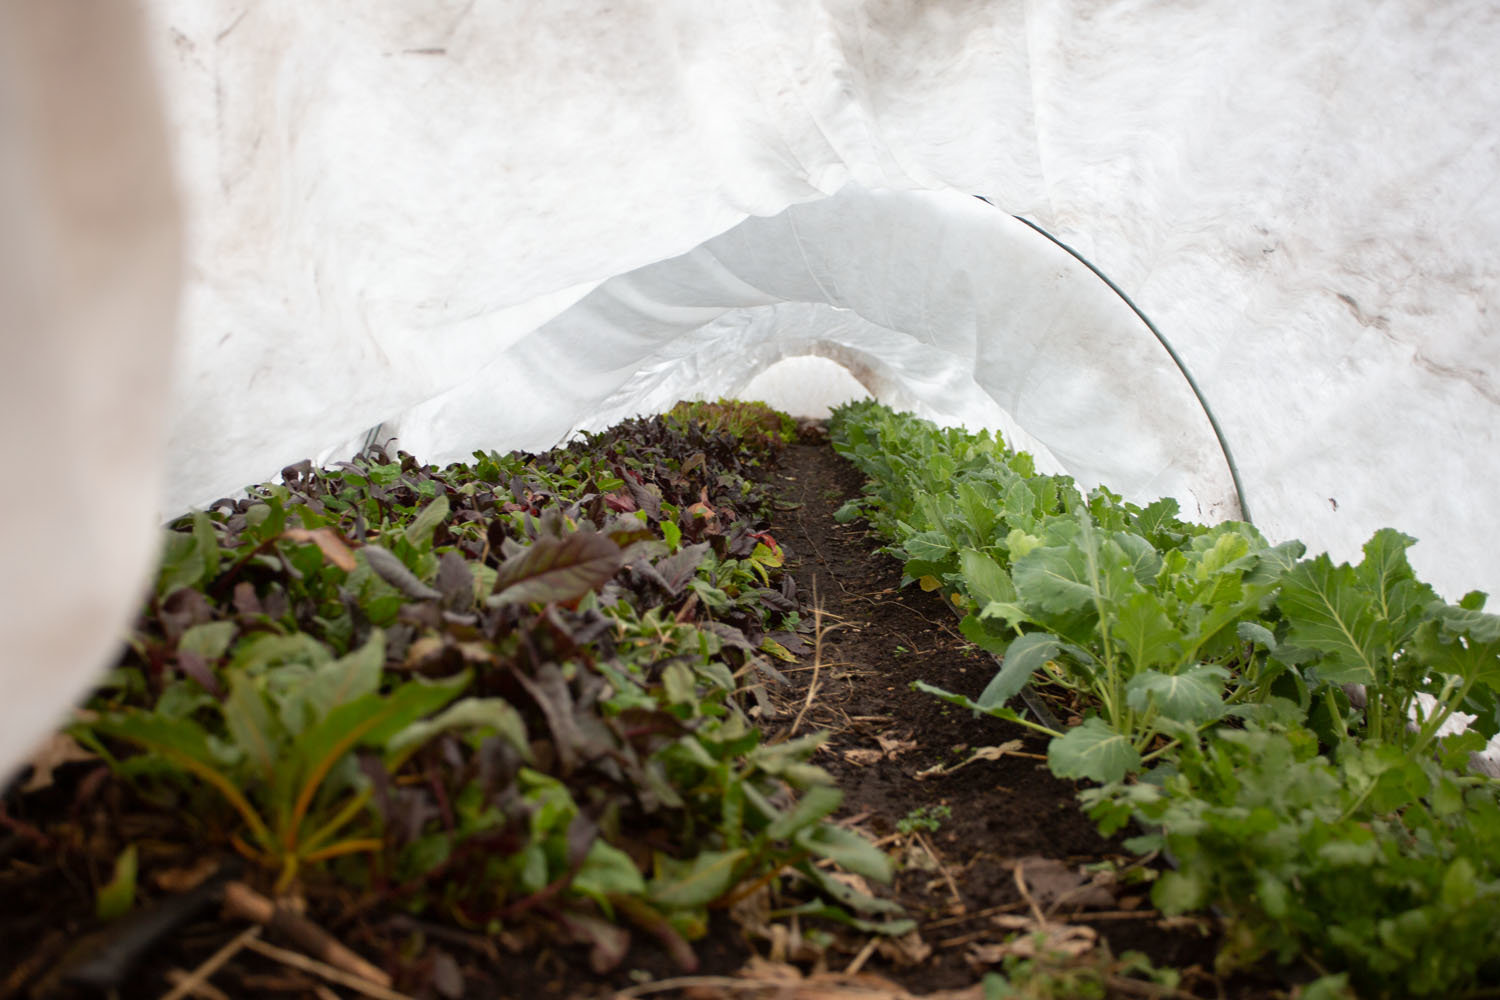 Under cover of a hoop house, produce grows in The Fairbanks’ garden area maintained by Springfield Community Gardens.